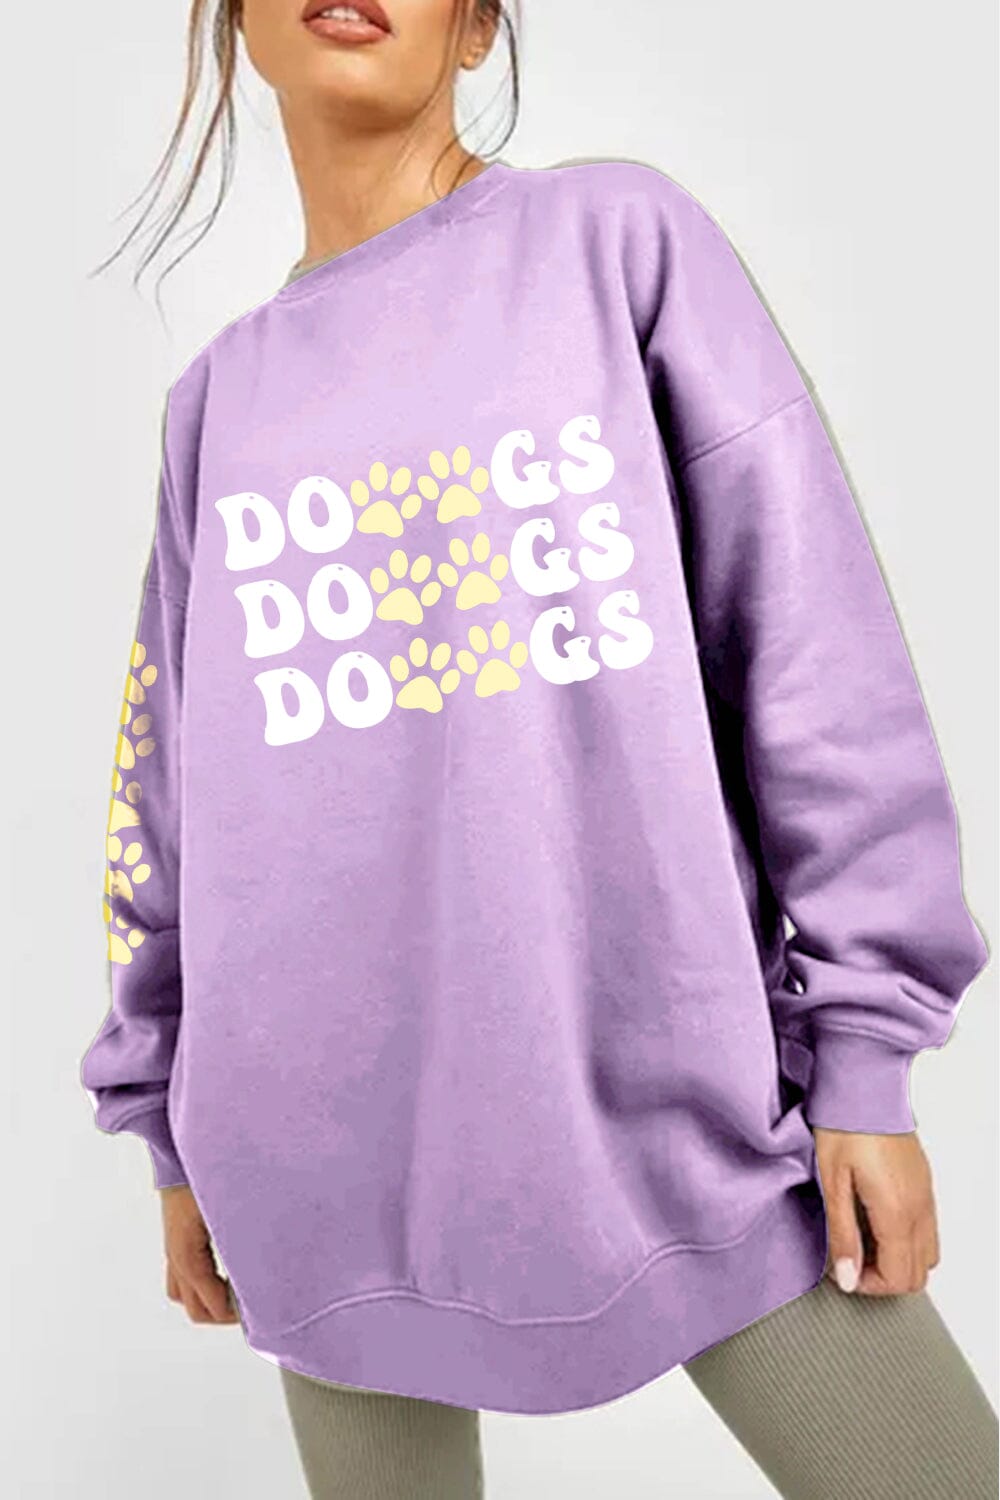 Dropped Shoulder DOGS Graphic Sweatshirt - Sydney So Sweet